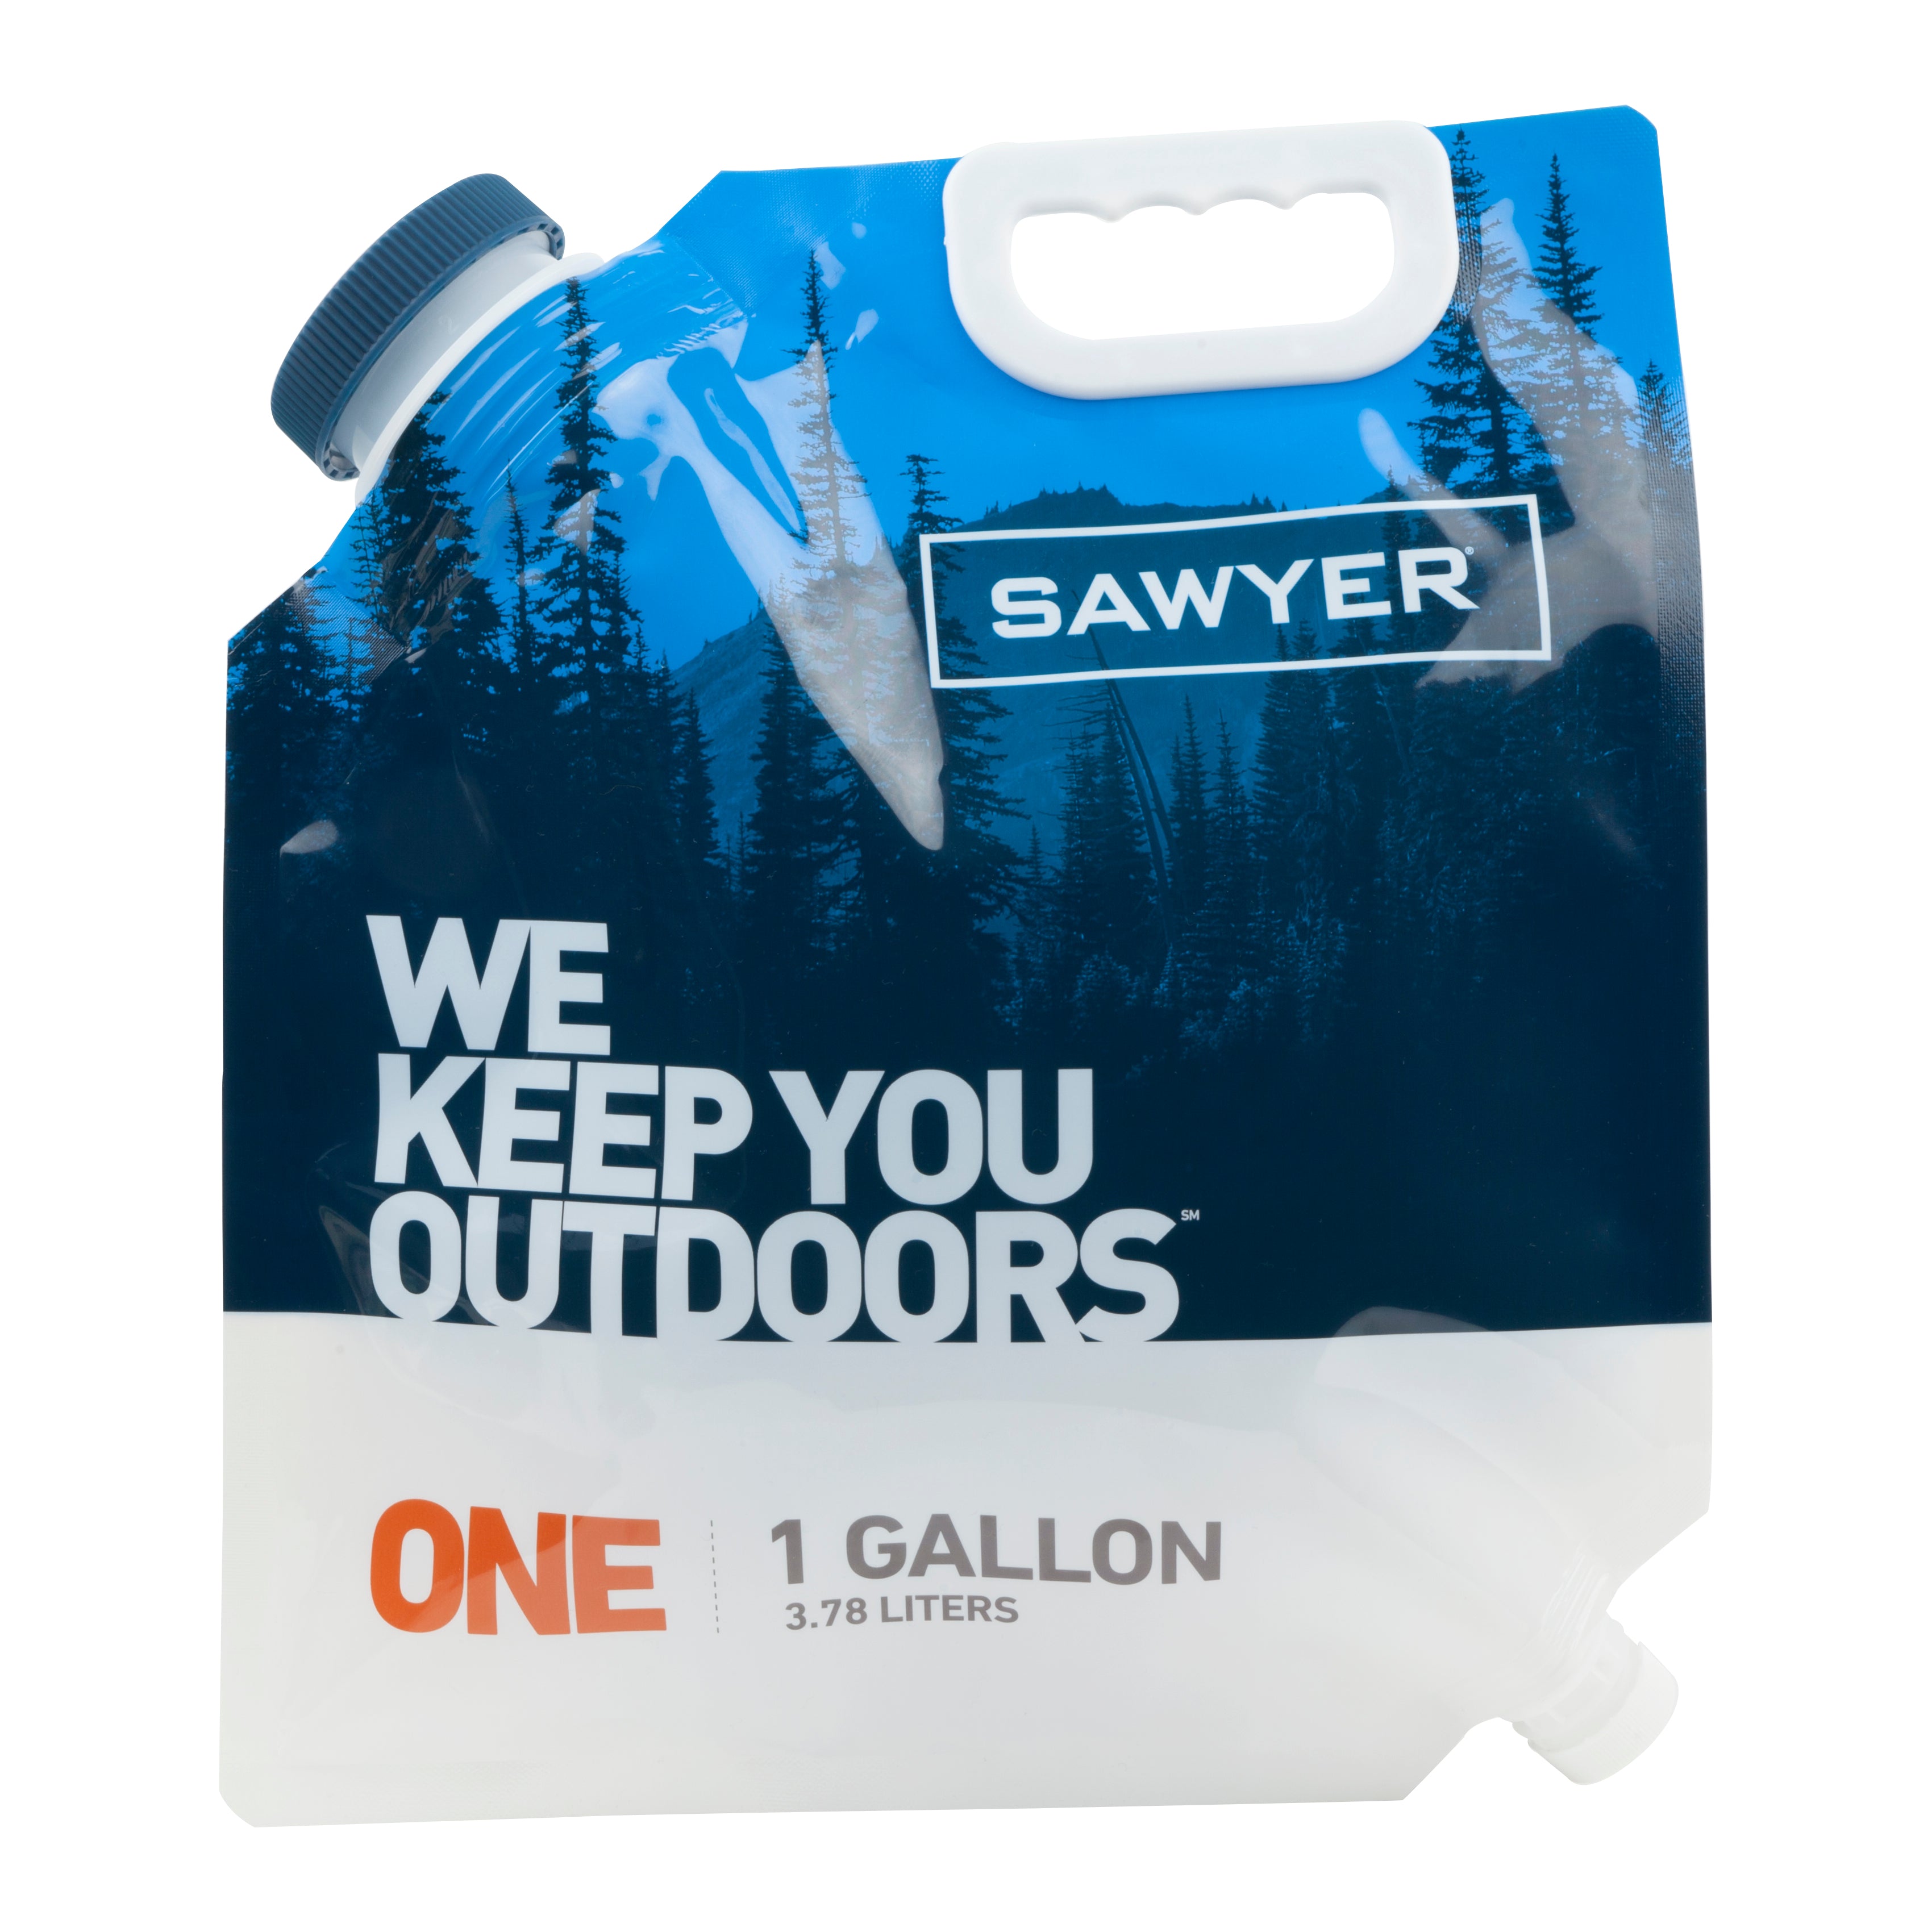 Sawyer 1GALLON POUCH / ソーヤー 1ガロン(3.78L) パウチ UPI ONLINE STORE